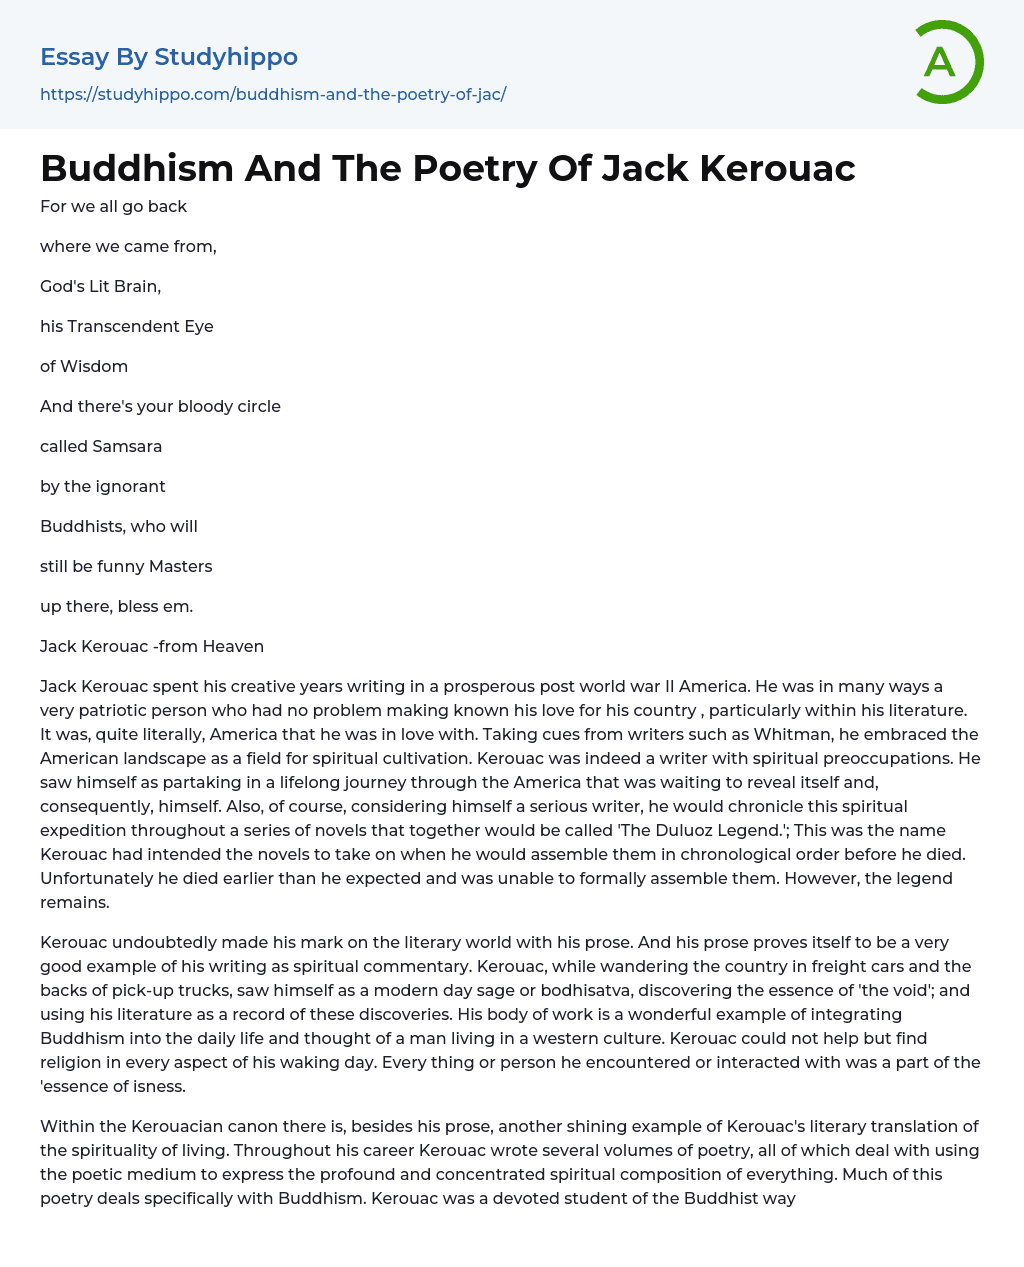 Buddhism And The Poetry Of Jack Kerouac Essay Example